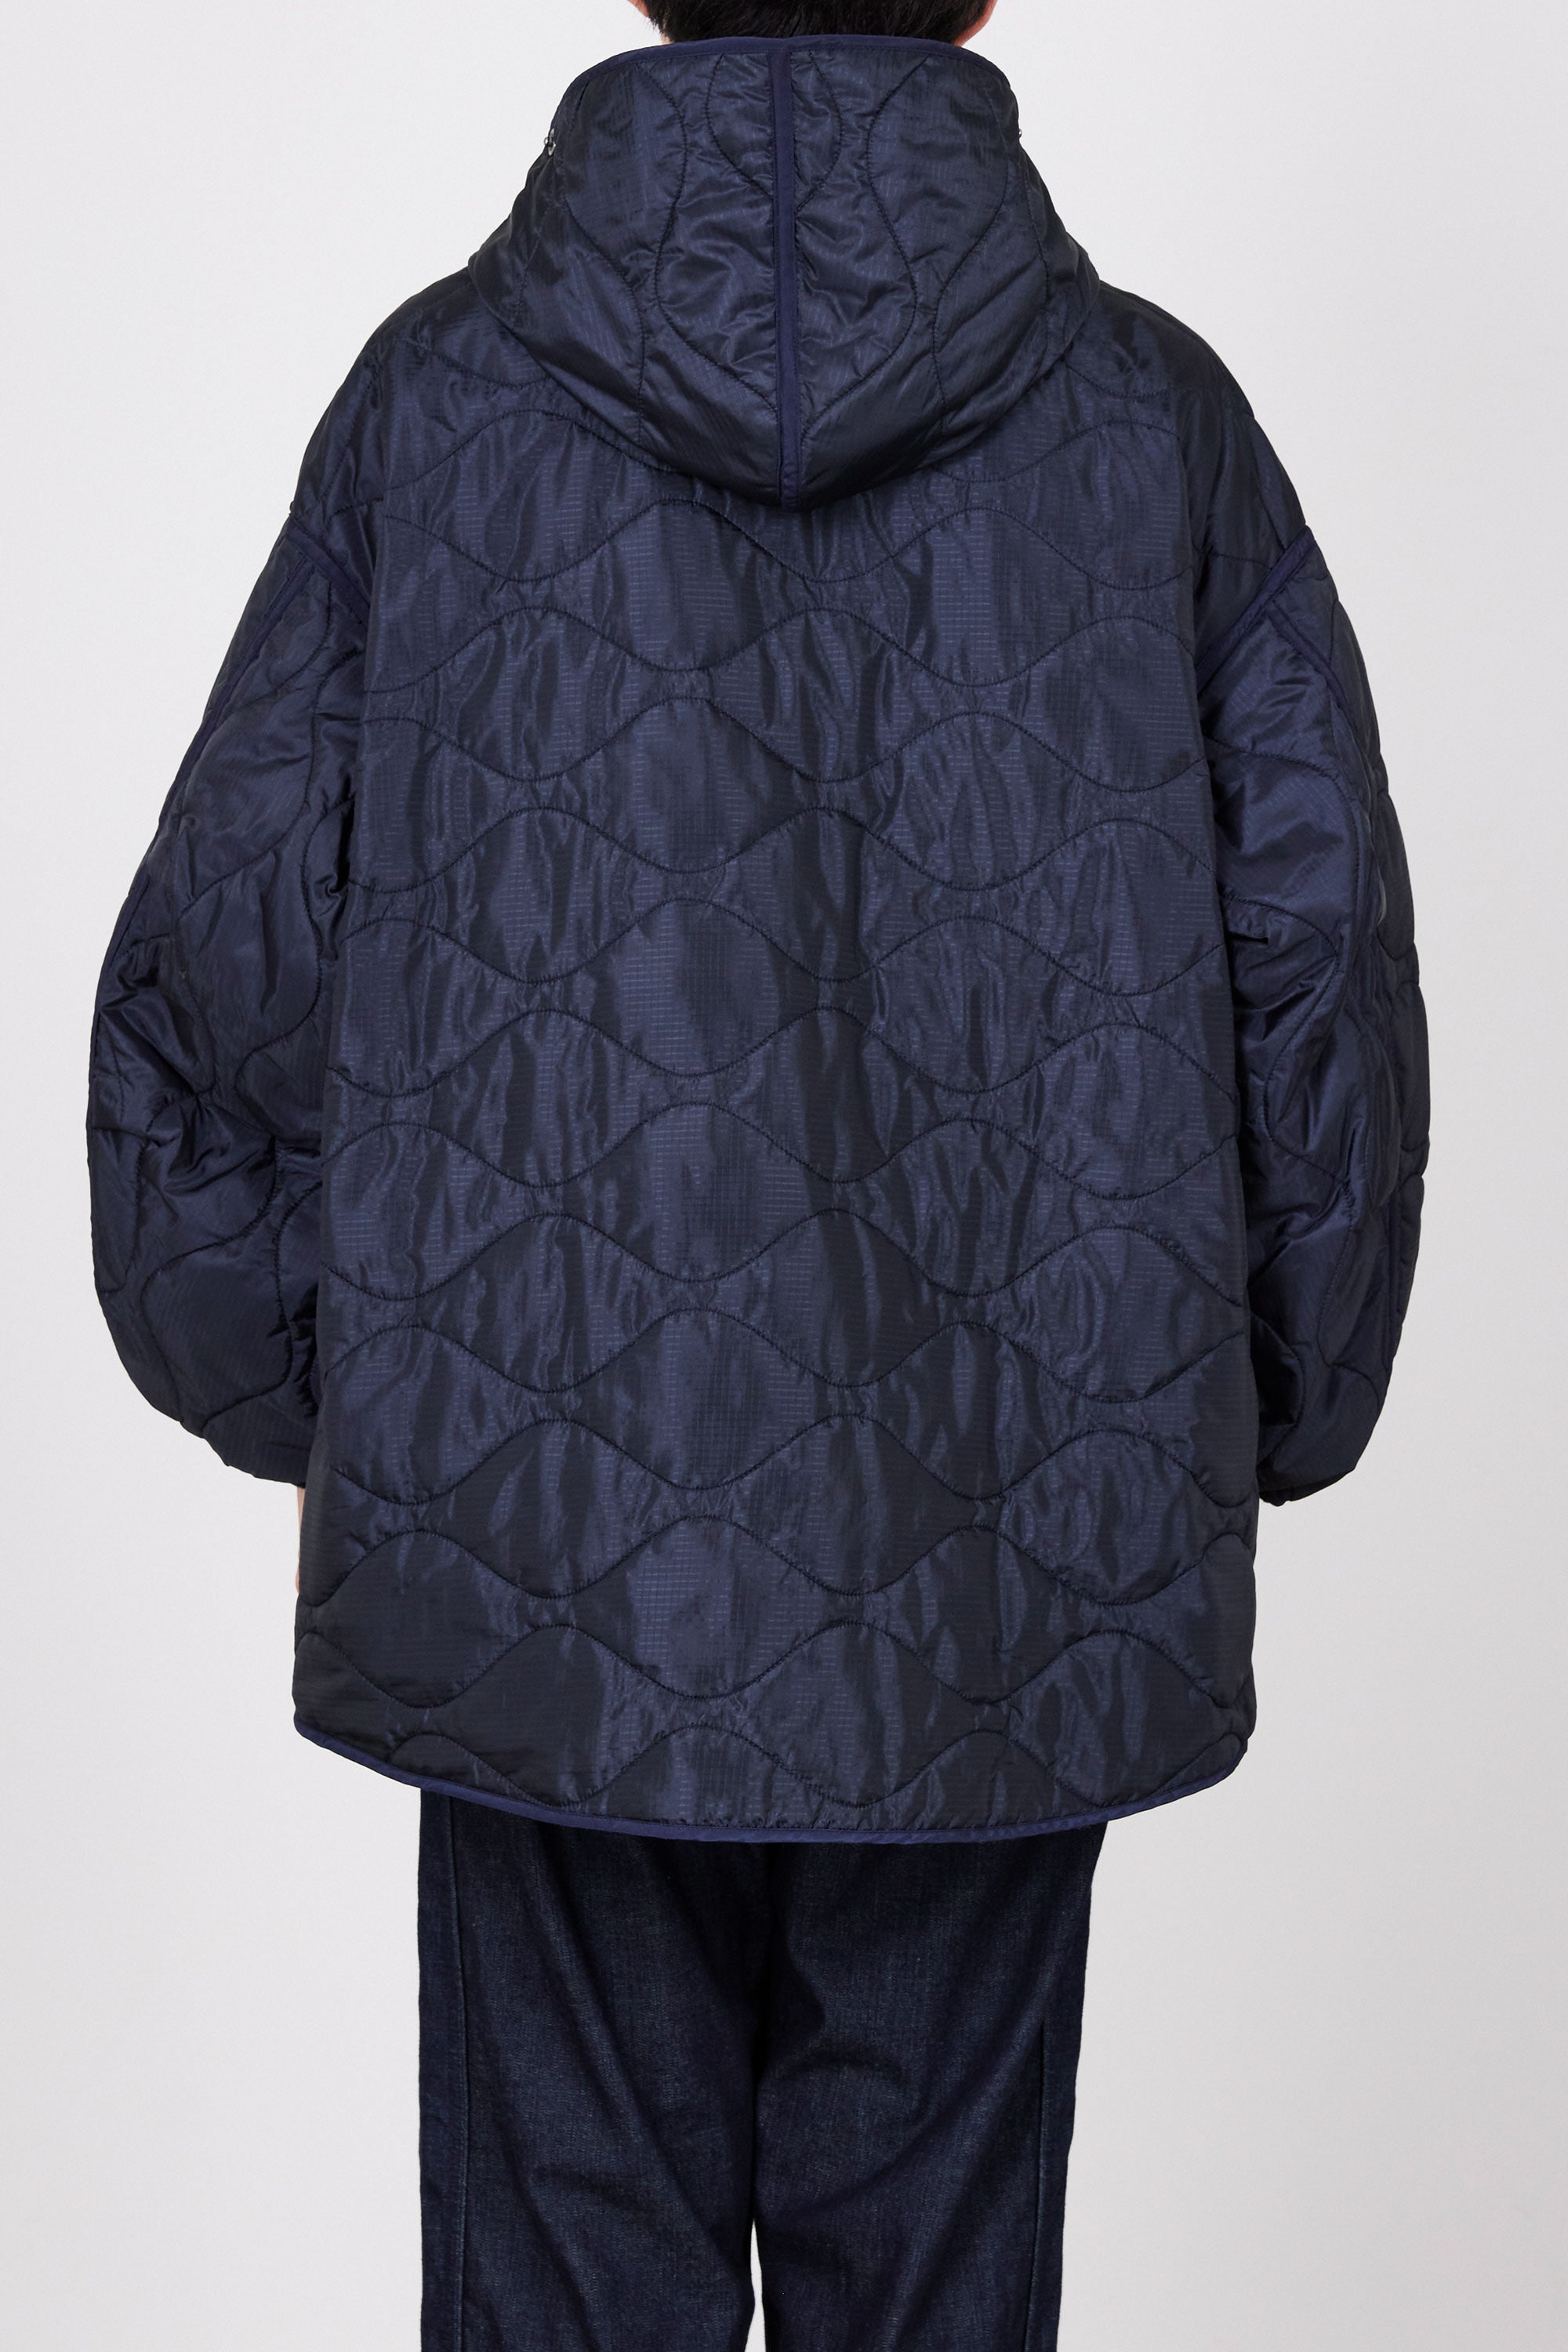 NYLON RIP STOP QUILTED LINER JACKET, Navy